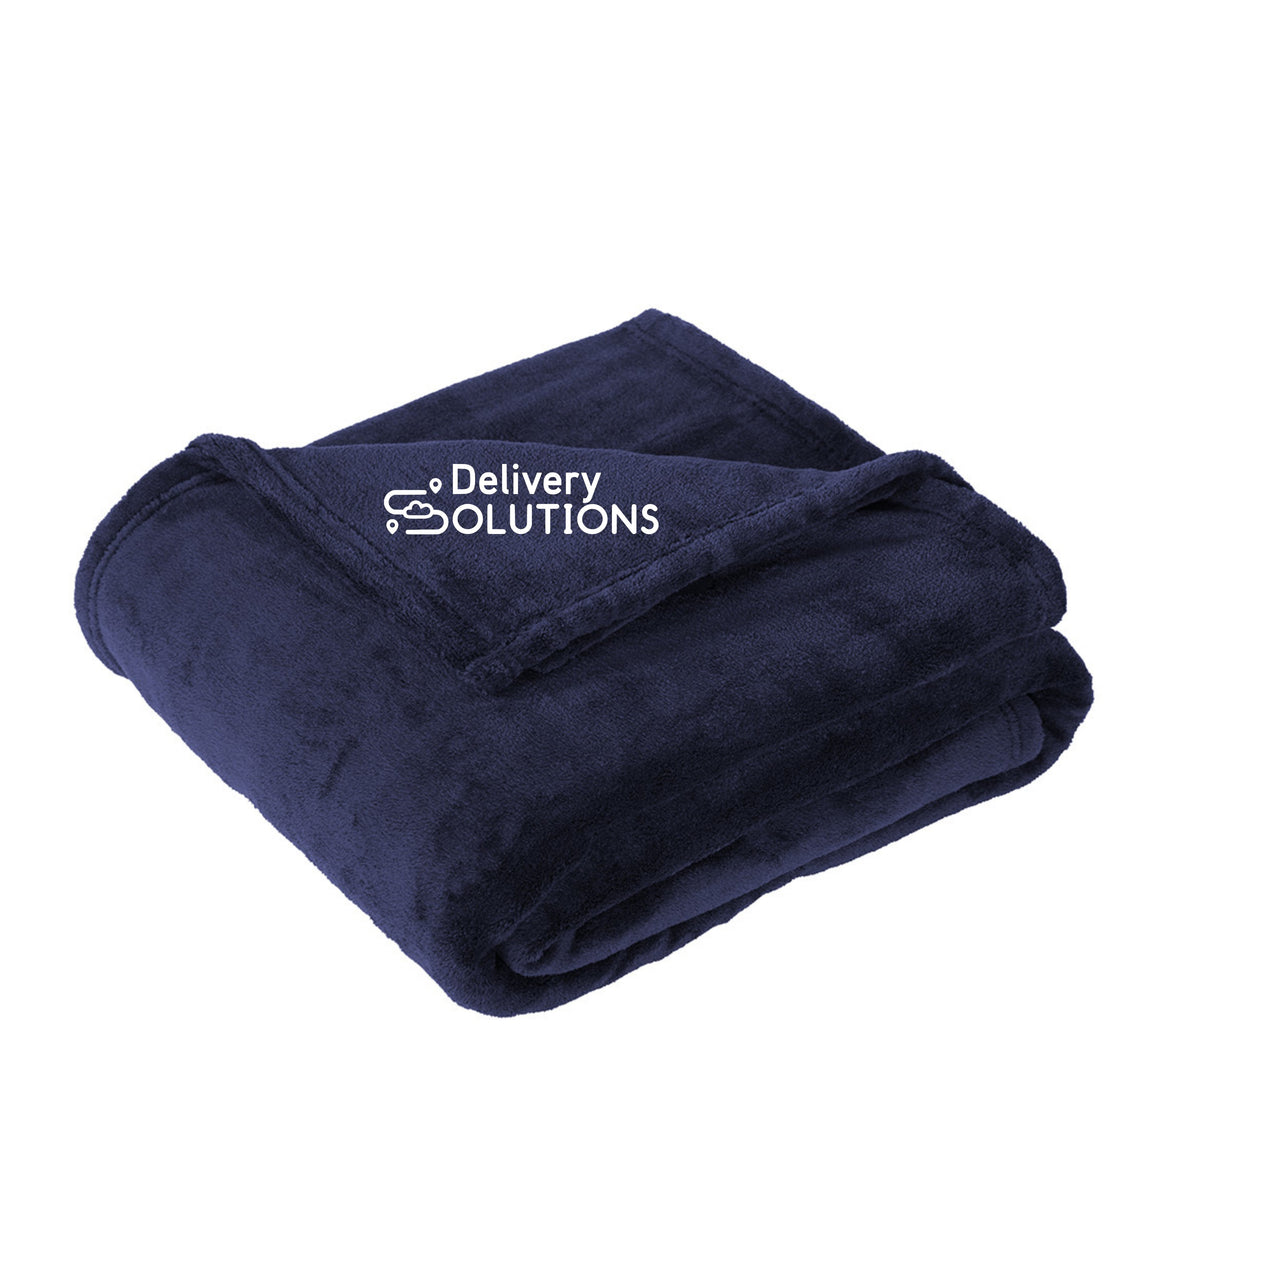 Oversized Ultra Plush Blanket - (Delivery Solutions)